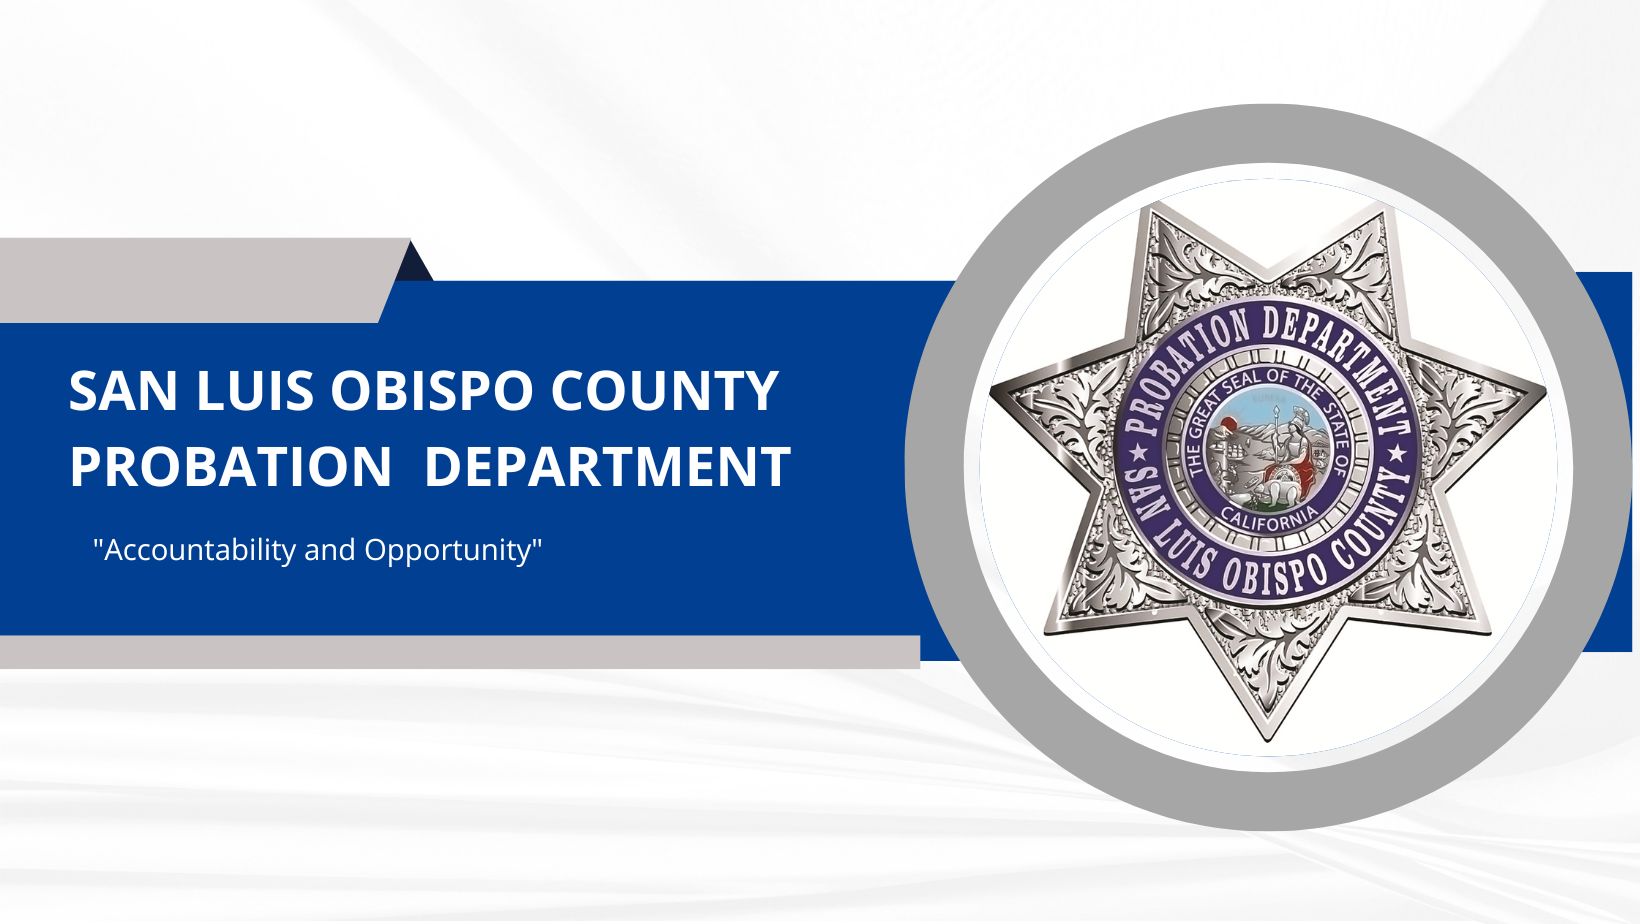 San Luis Obispo Probation Department - Accountability and Opportunity